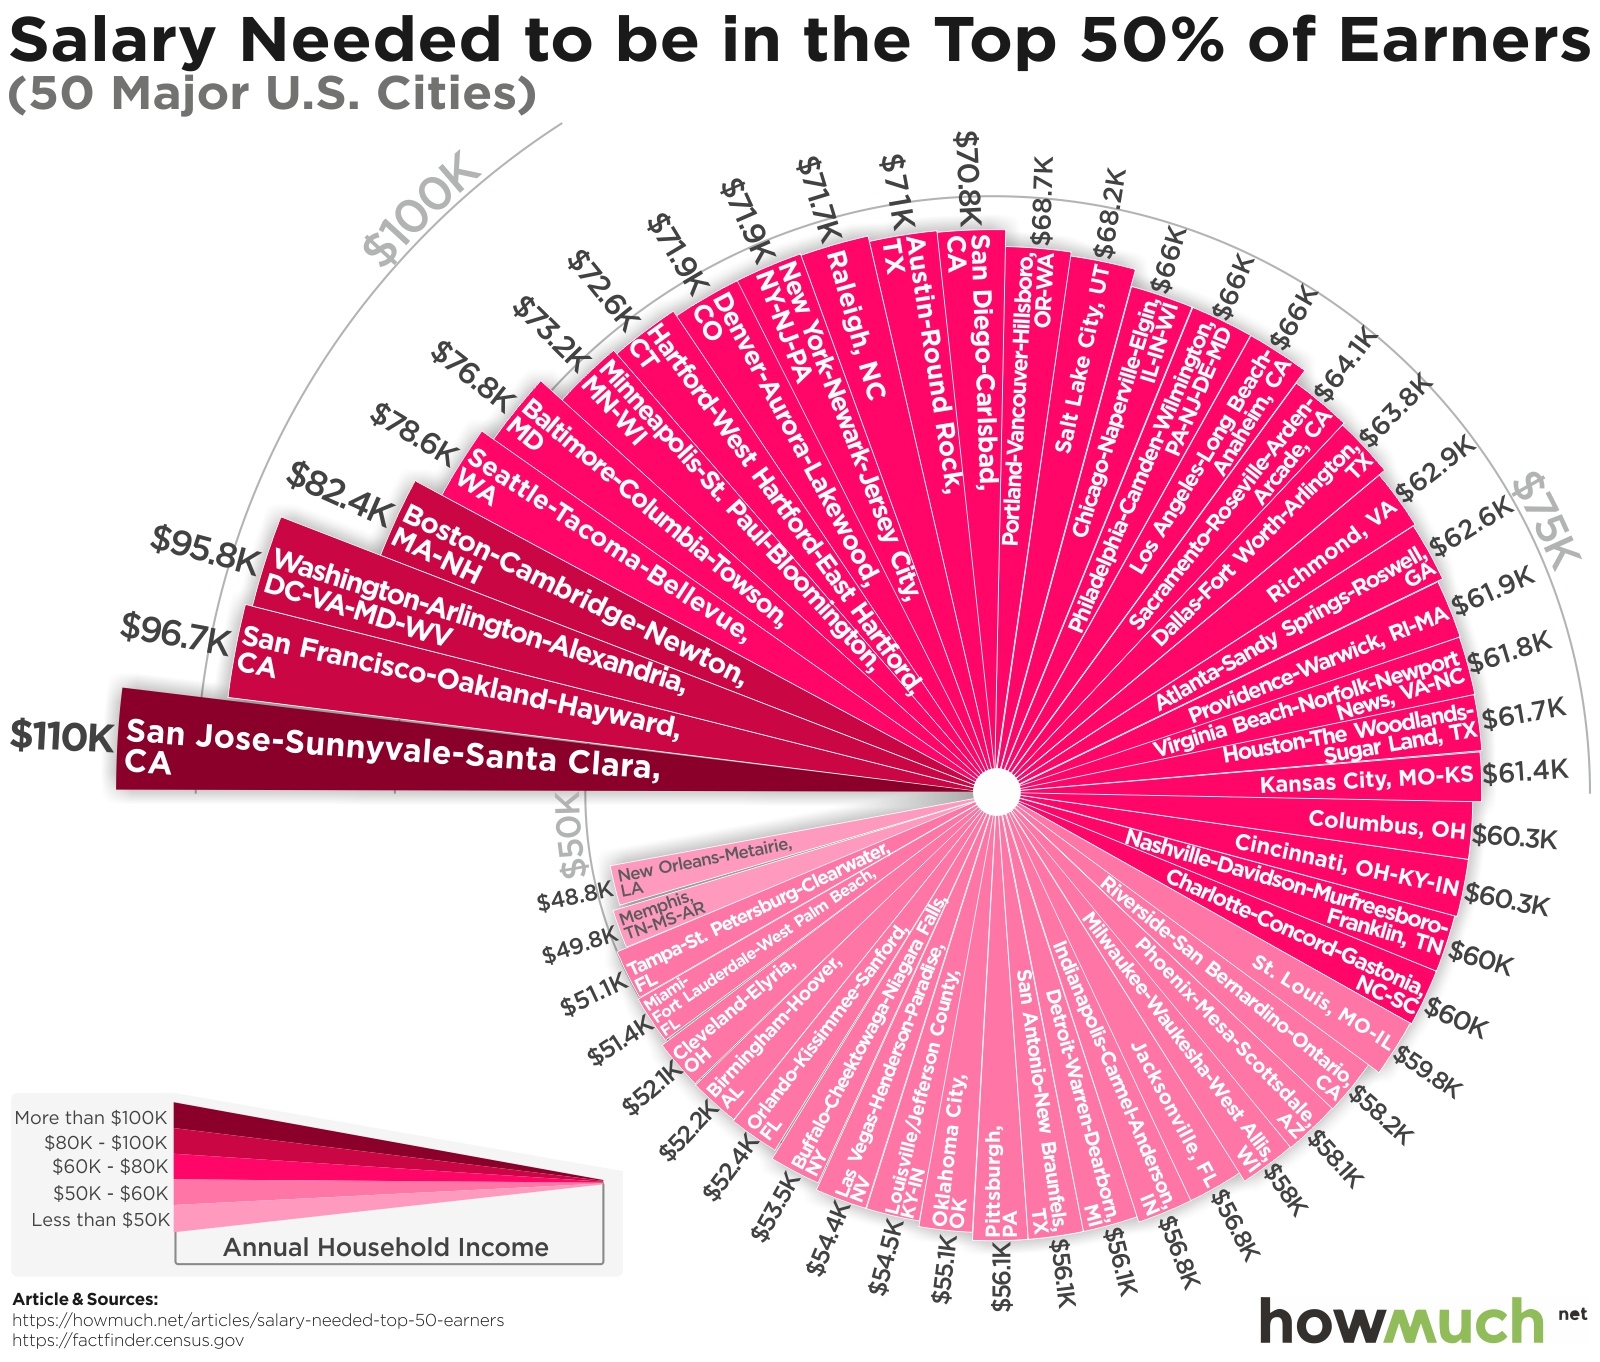 Are you rich? Salary needed to reach the top 50%25.